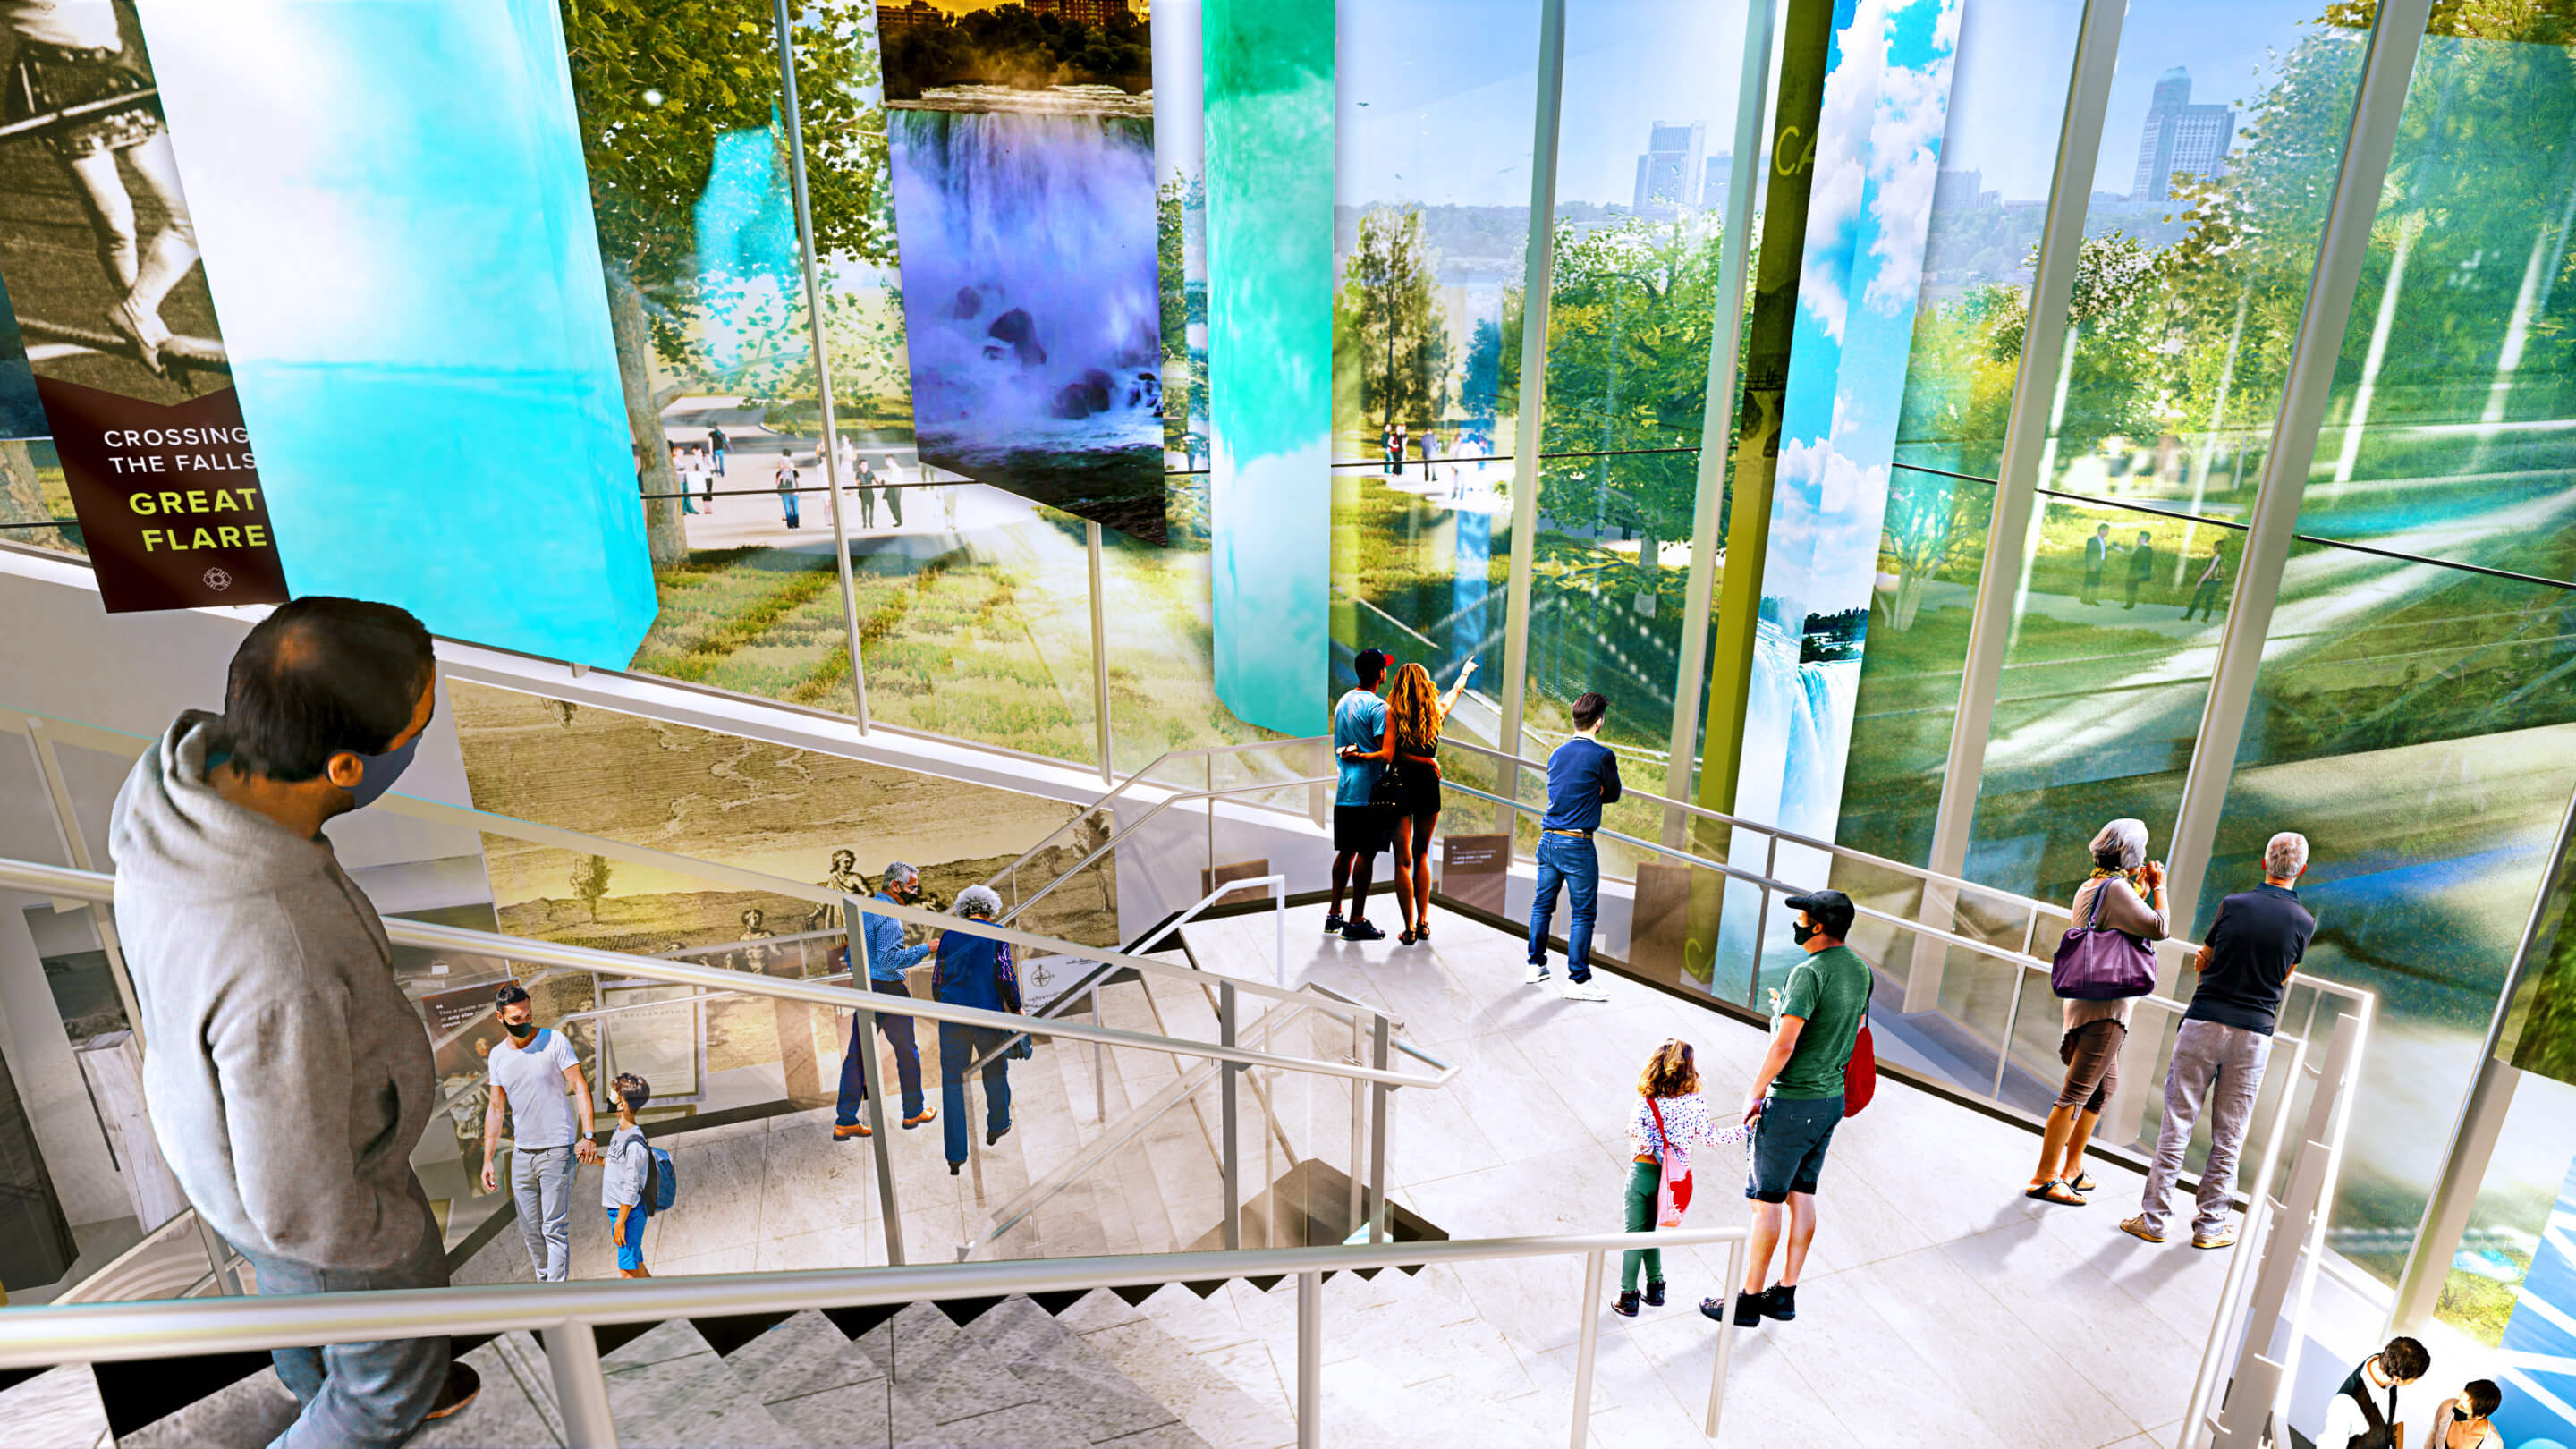 rendering of people descending stairs in a visitors center